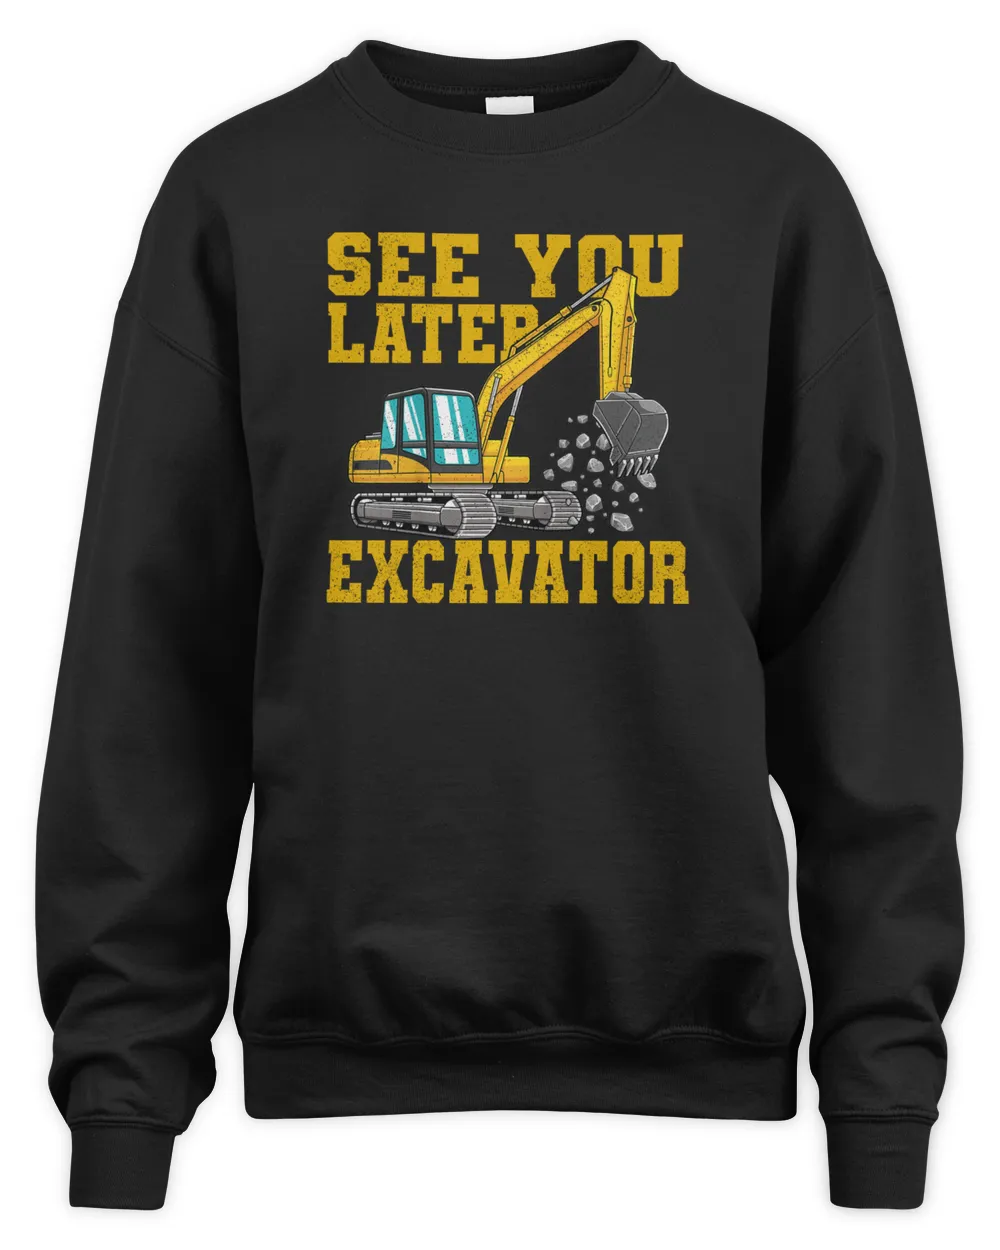 See You Later Excavator Shirt Funny Toddler Boy Kids